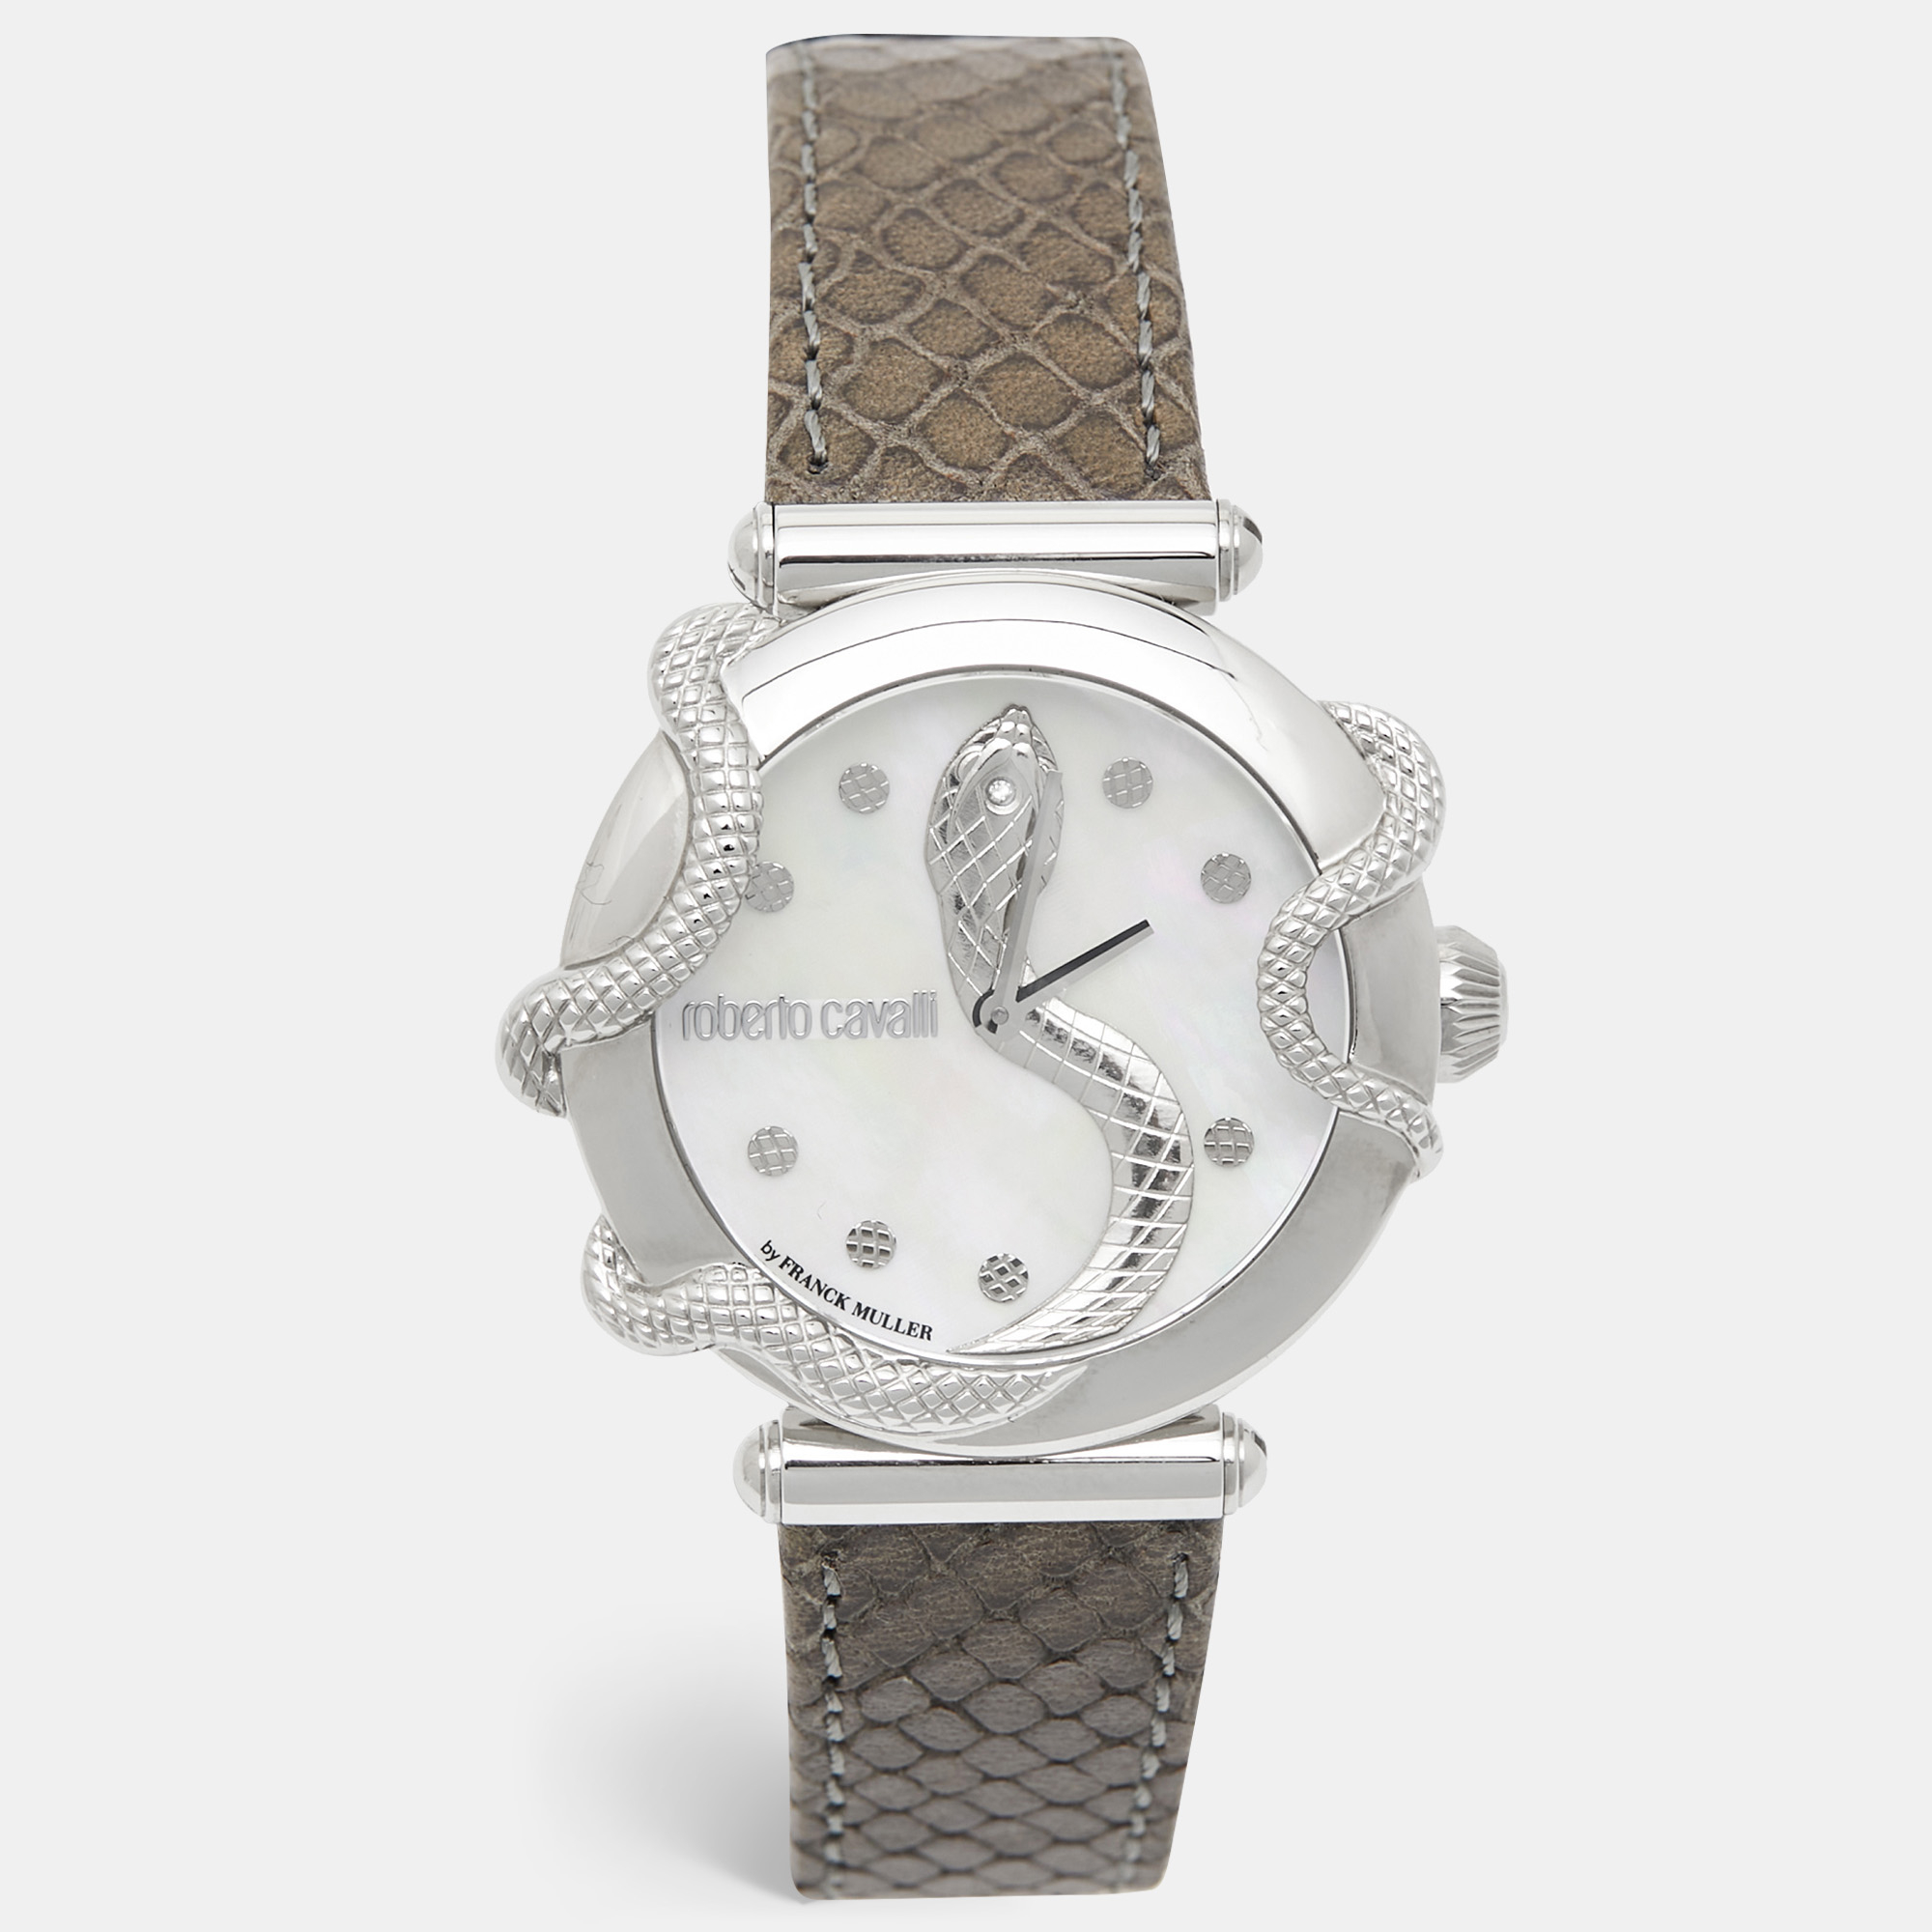 

Roberto Cavalli by Franck Muller Mother of Pearl Stainless Steel Leather, White